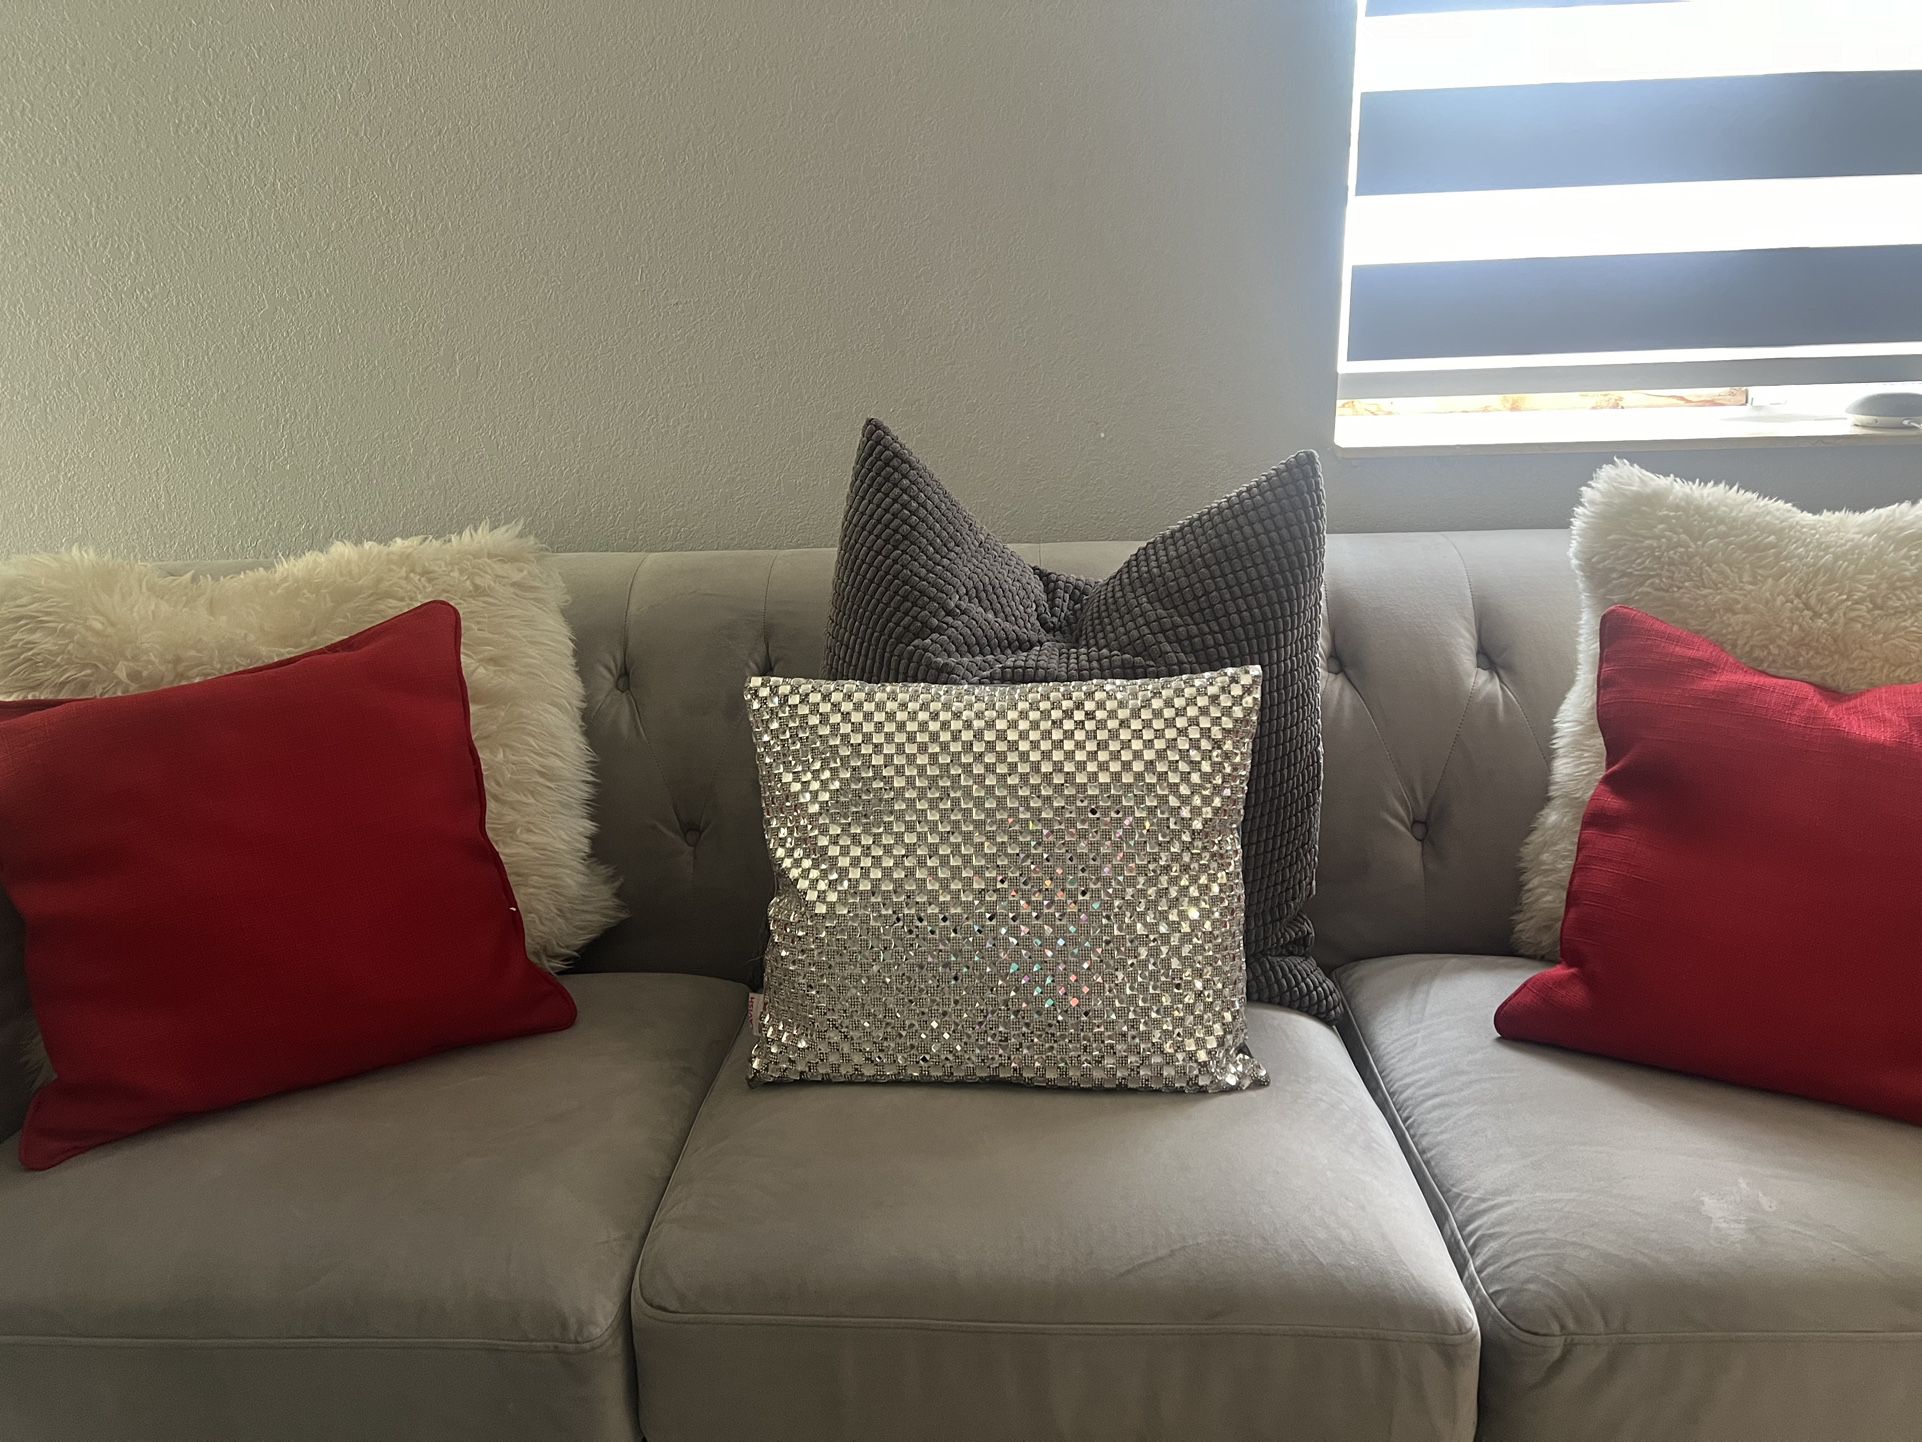 Wall Accent & Couch accent pillows 